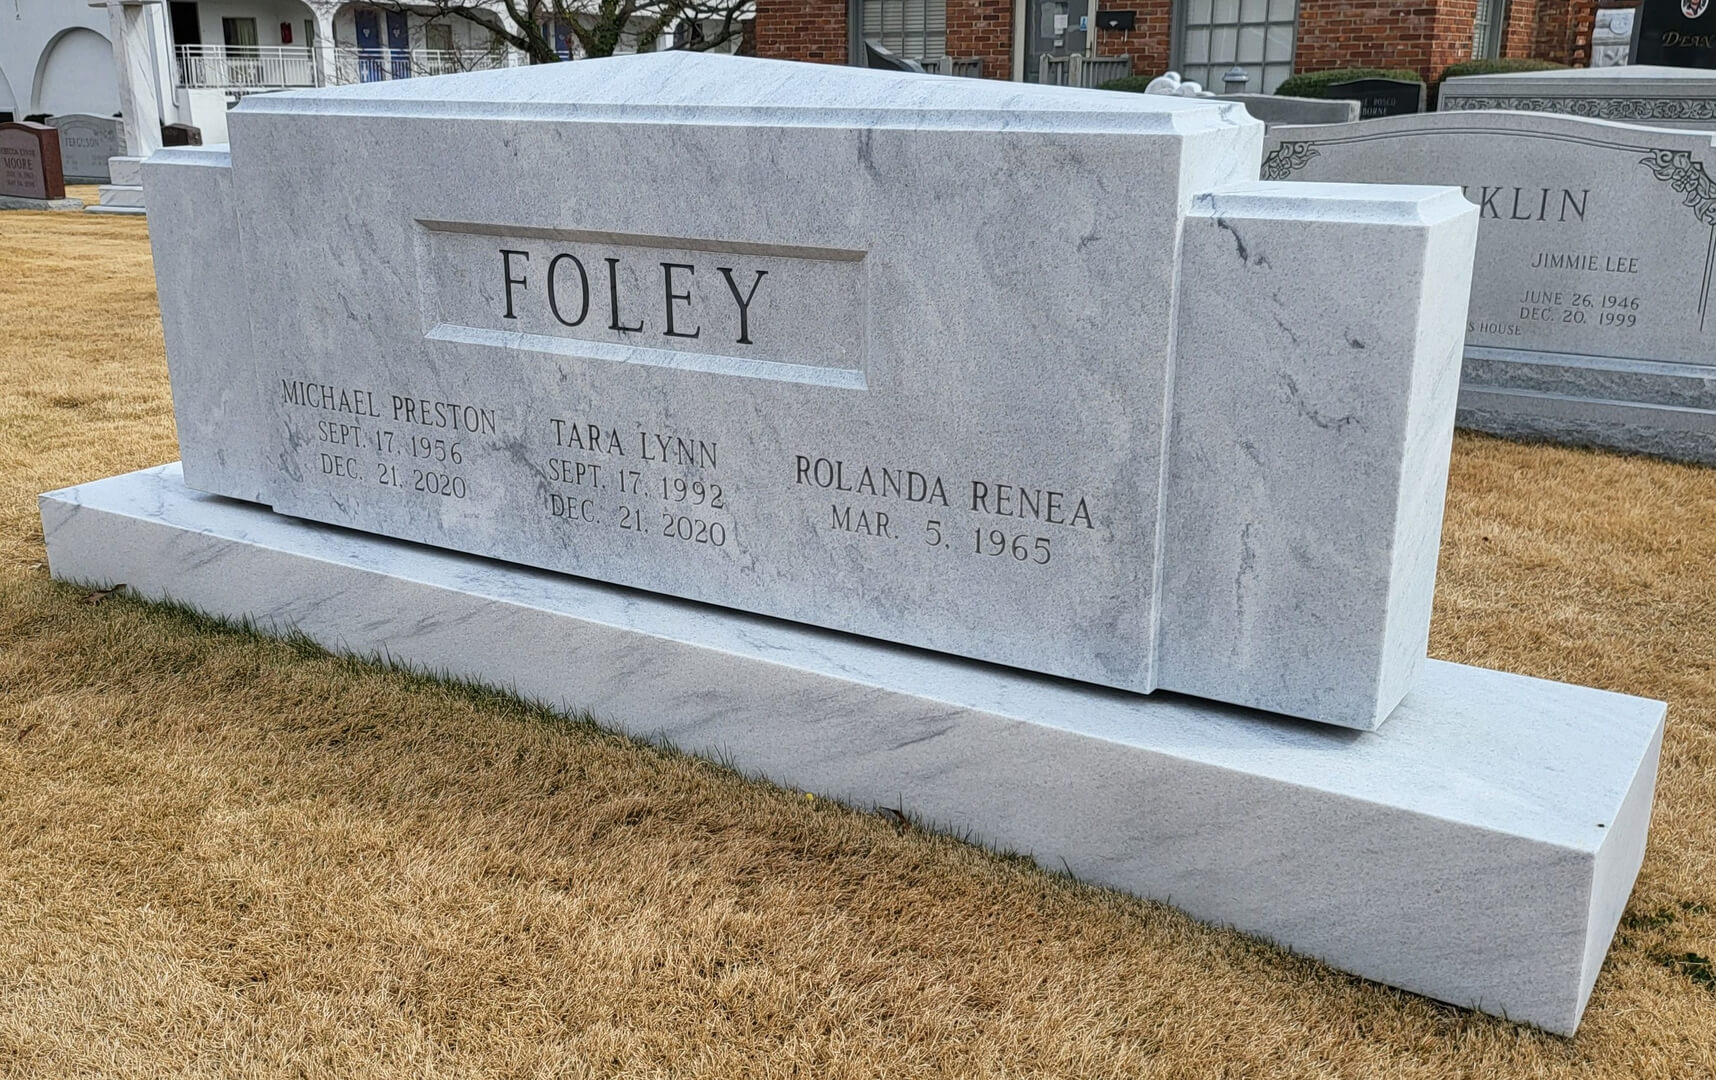 A memorial slab with the name and illustration by the text Foley